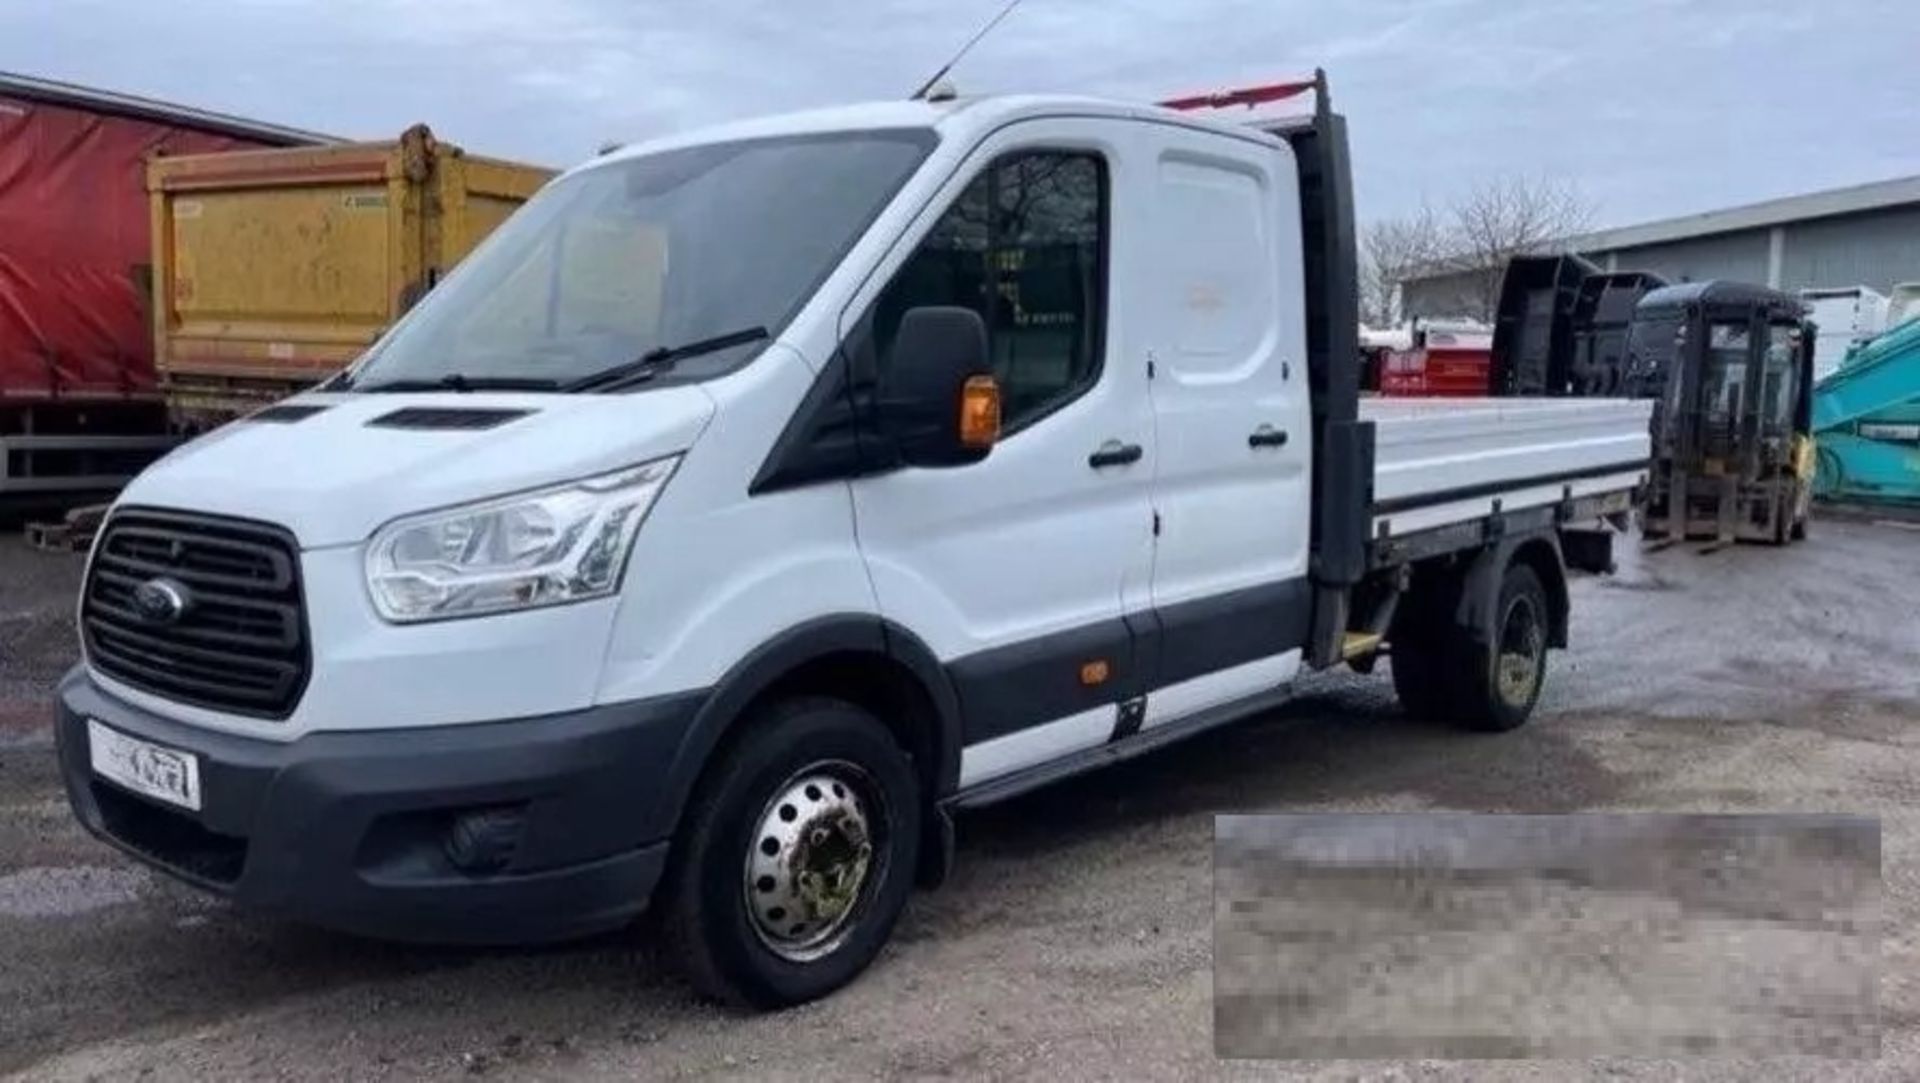 FORD TRANSIT T350 CREWCAB DROPSIDE TRUCK 2016 - LOW MILEAGE, >>>SPARES OR REPAIRS <<< - Image 8 of 9